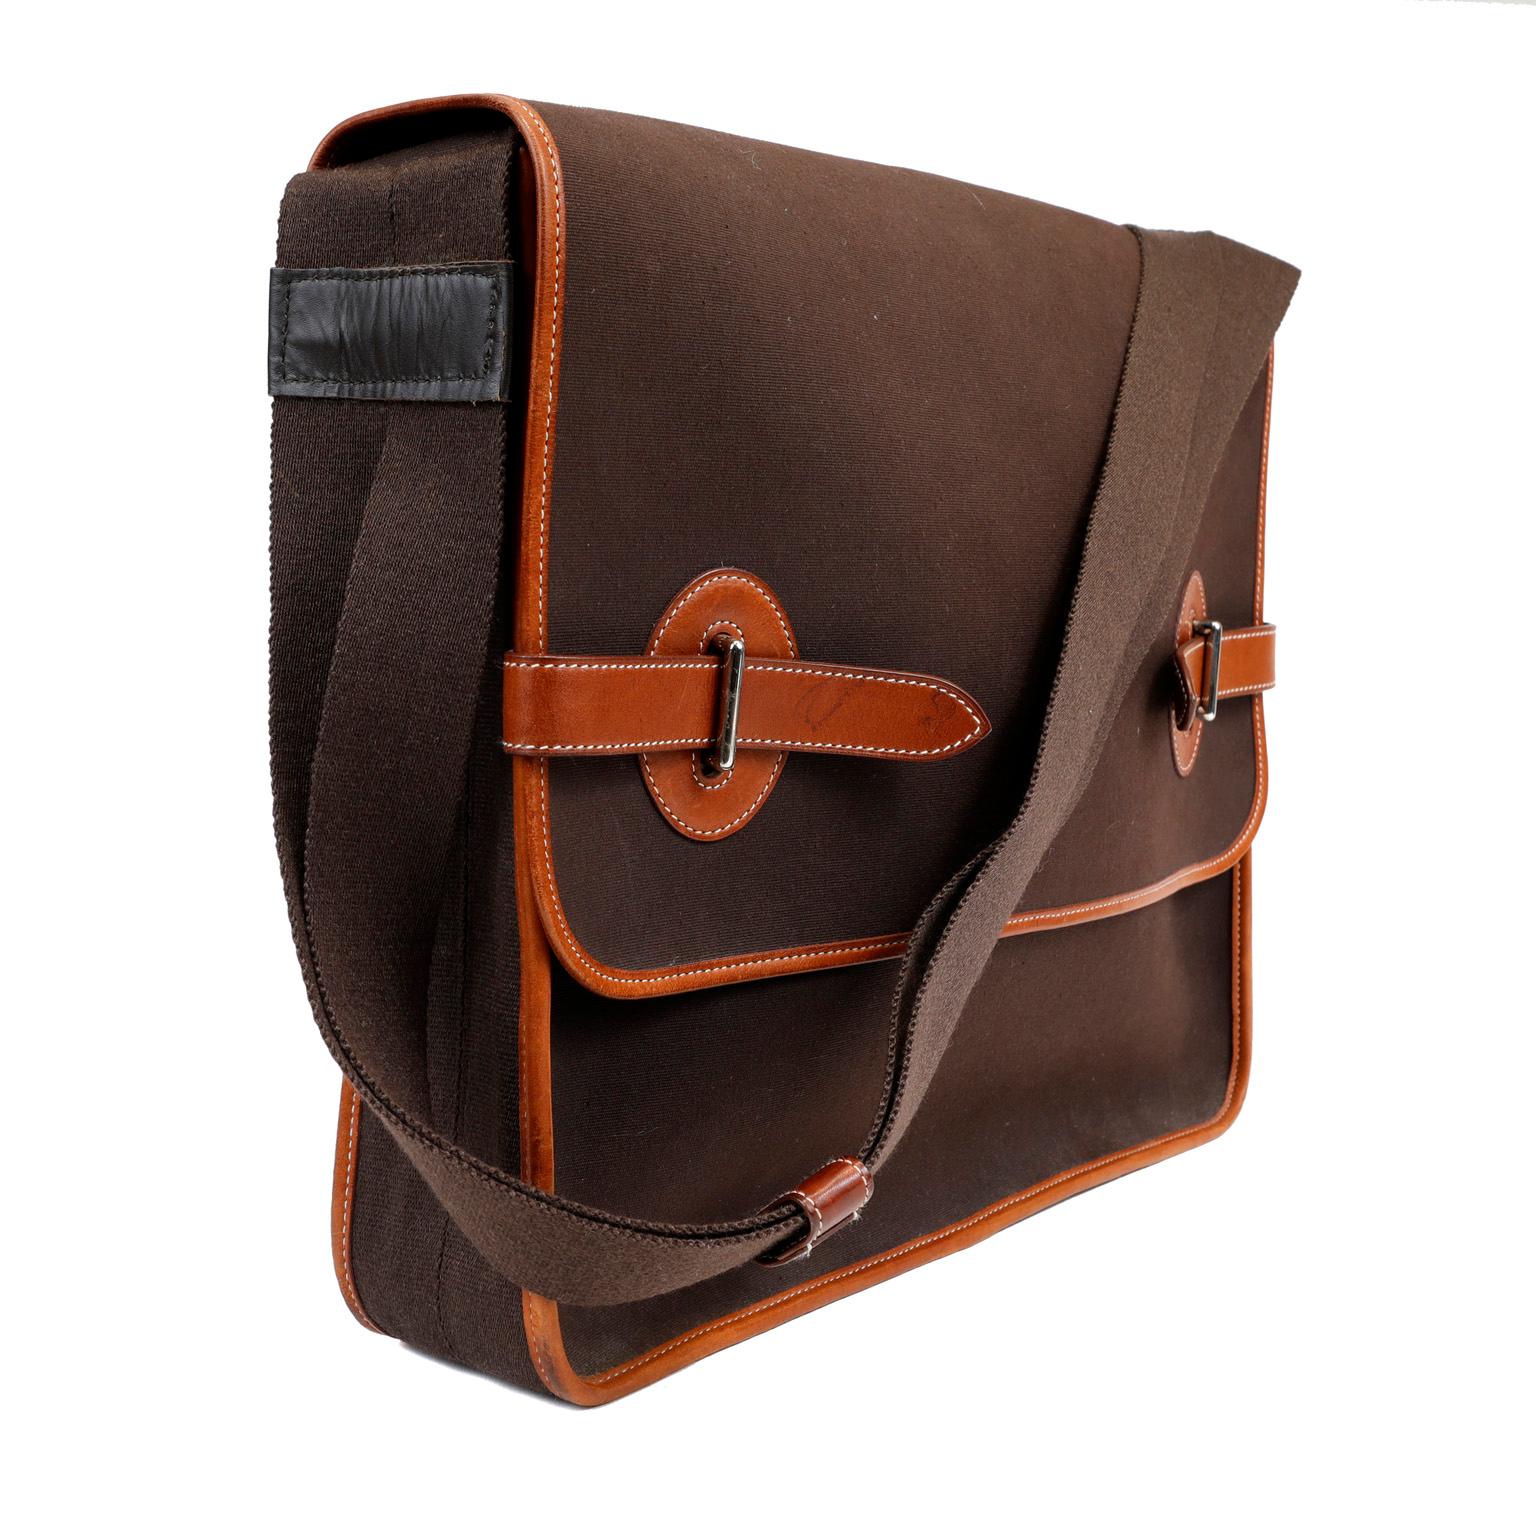 This authentic Hermès Brown Canvas Oversized Messenger Bag is in excellent condition with normal darkening of the leather trimmings Unisex and utilitarian, it easily carries the key essentials for a busy day.    
Dark brown canvas messenger bag with